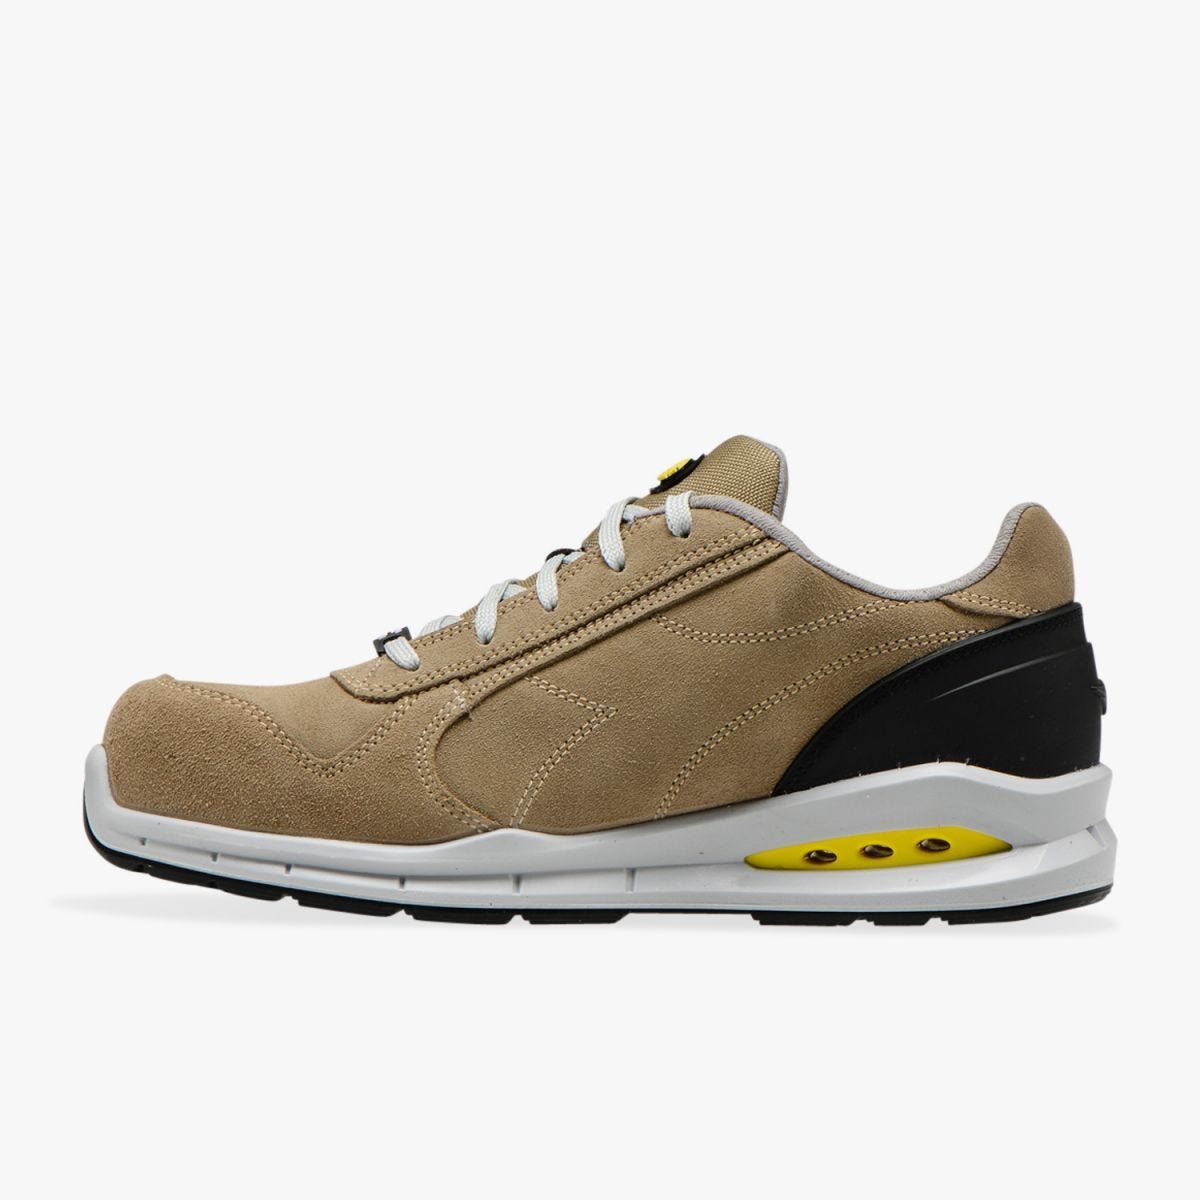 CHAUSSURE SECURITE RUN NET AIRBOX LOW S3 SRC TAUPE/TAUPE - Diadora - Taille 43 1